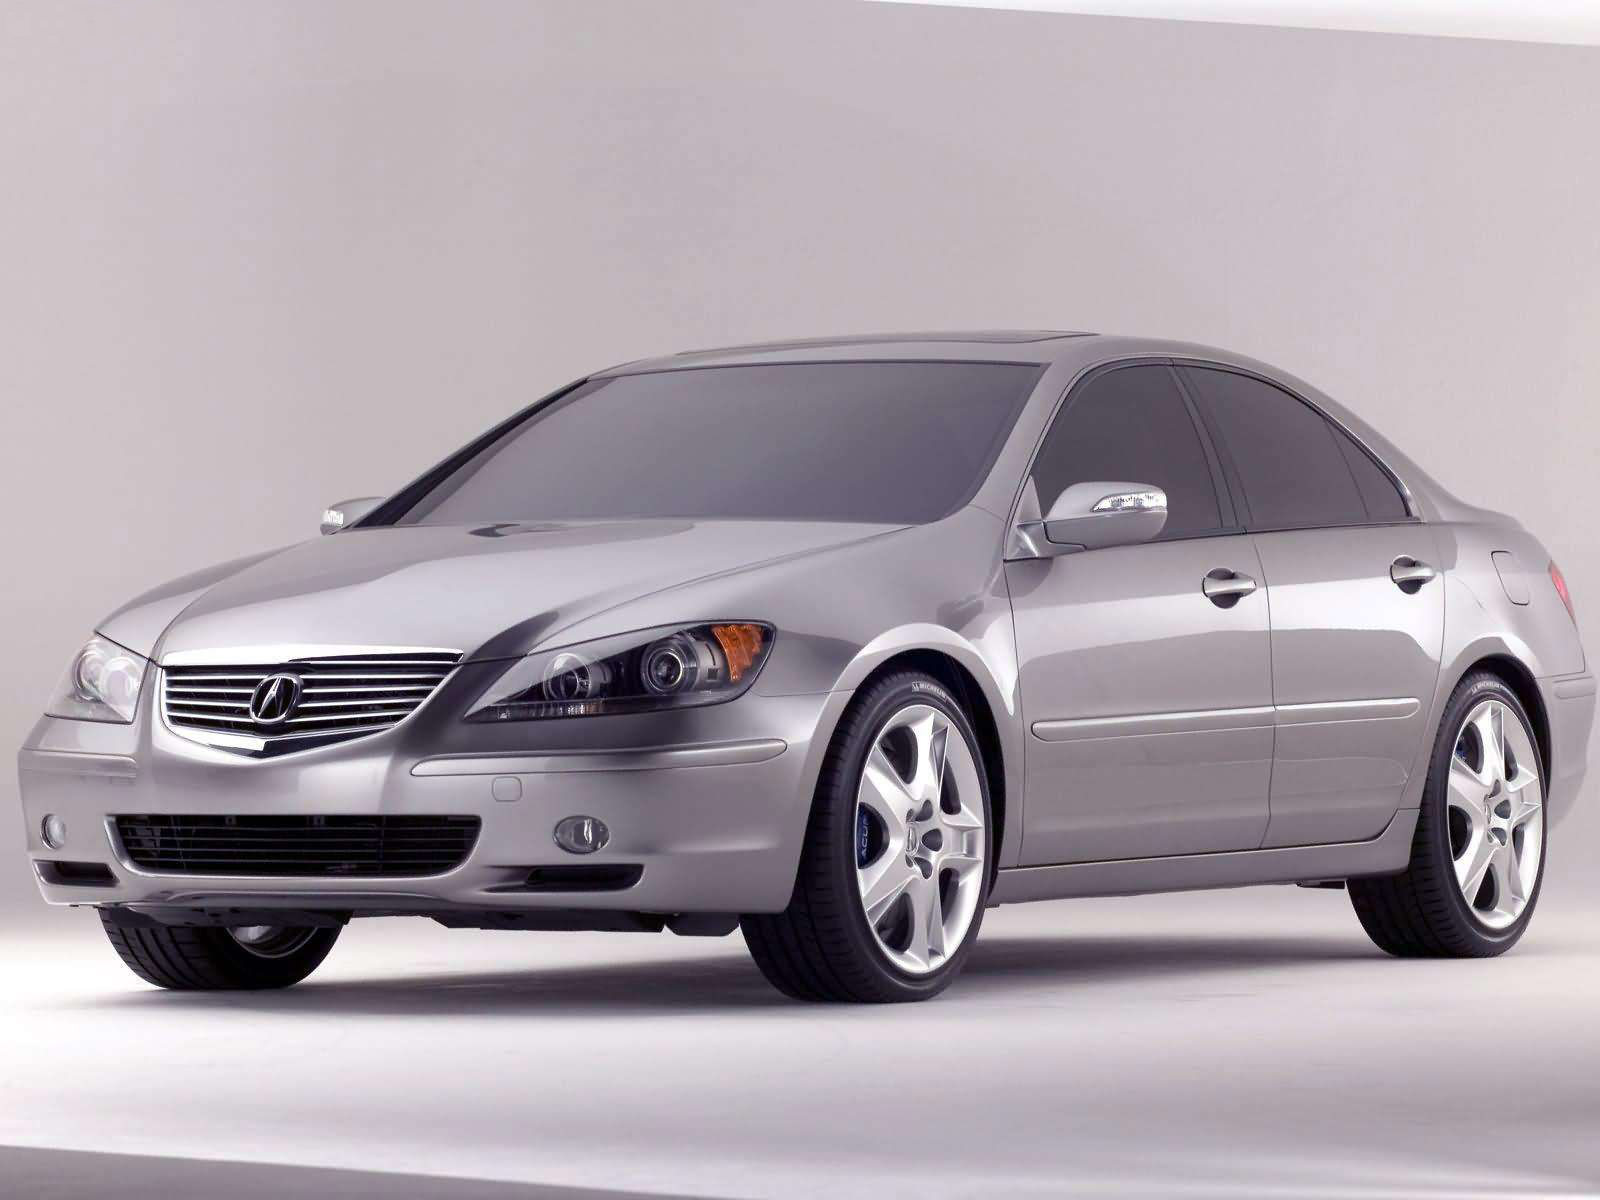 2004 Acura RL Prototype japanese car wallpapers 6